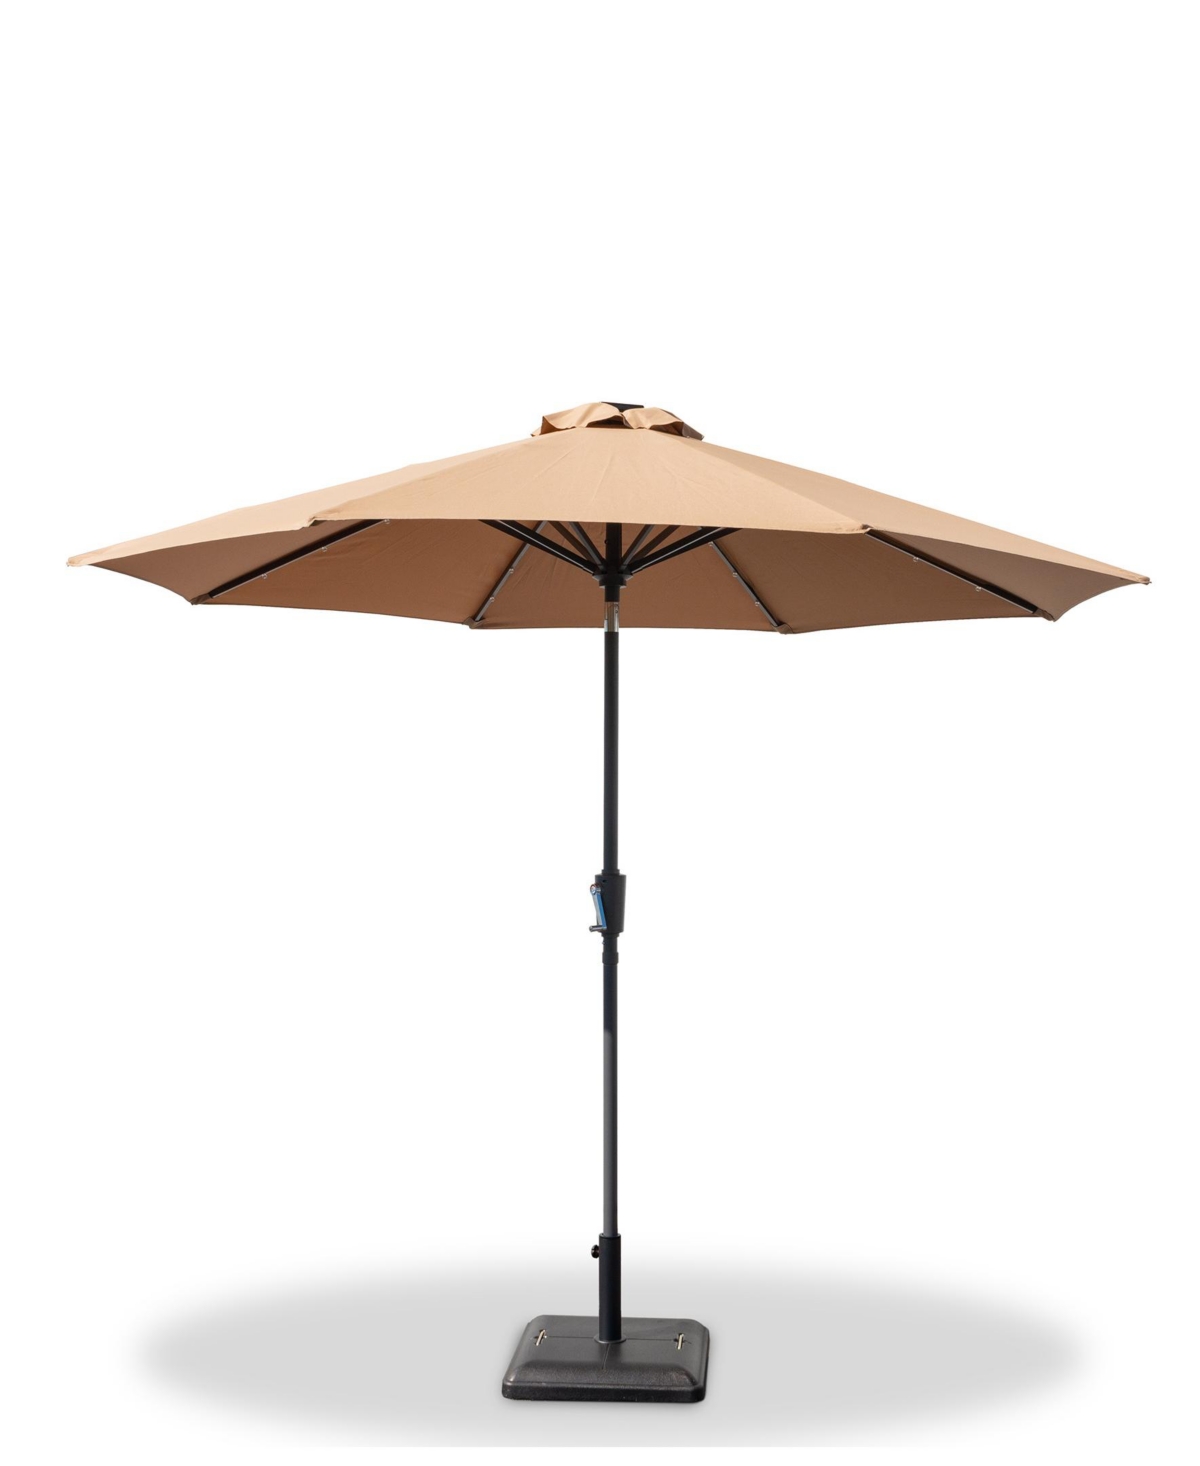 Unique Furniture 9' Polyester, Aluminum Patio And Outdoor Umbrellas With Push Button Tilt, Crank And Led Lights Umbre In Brown